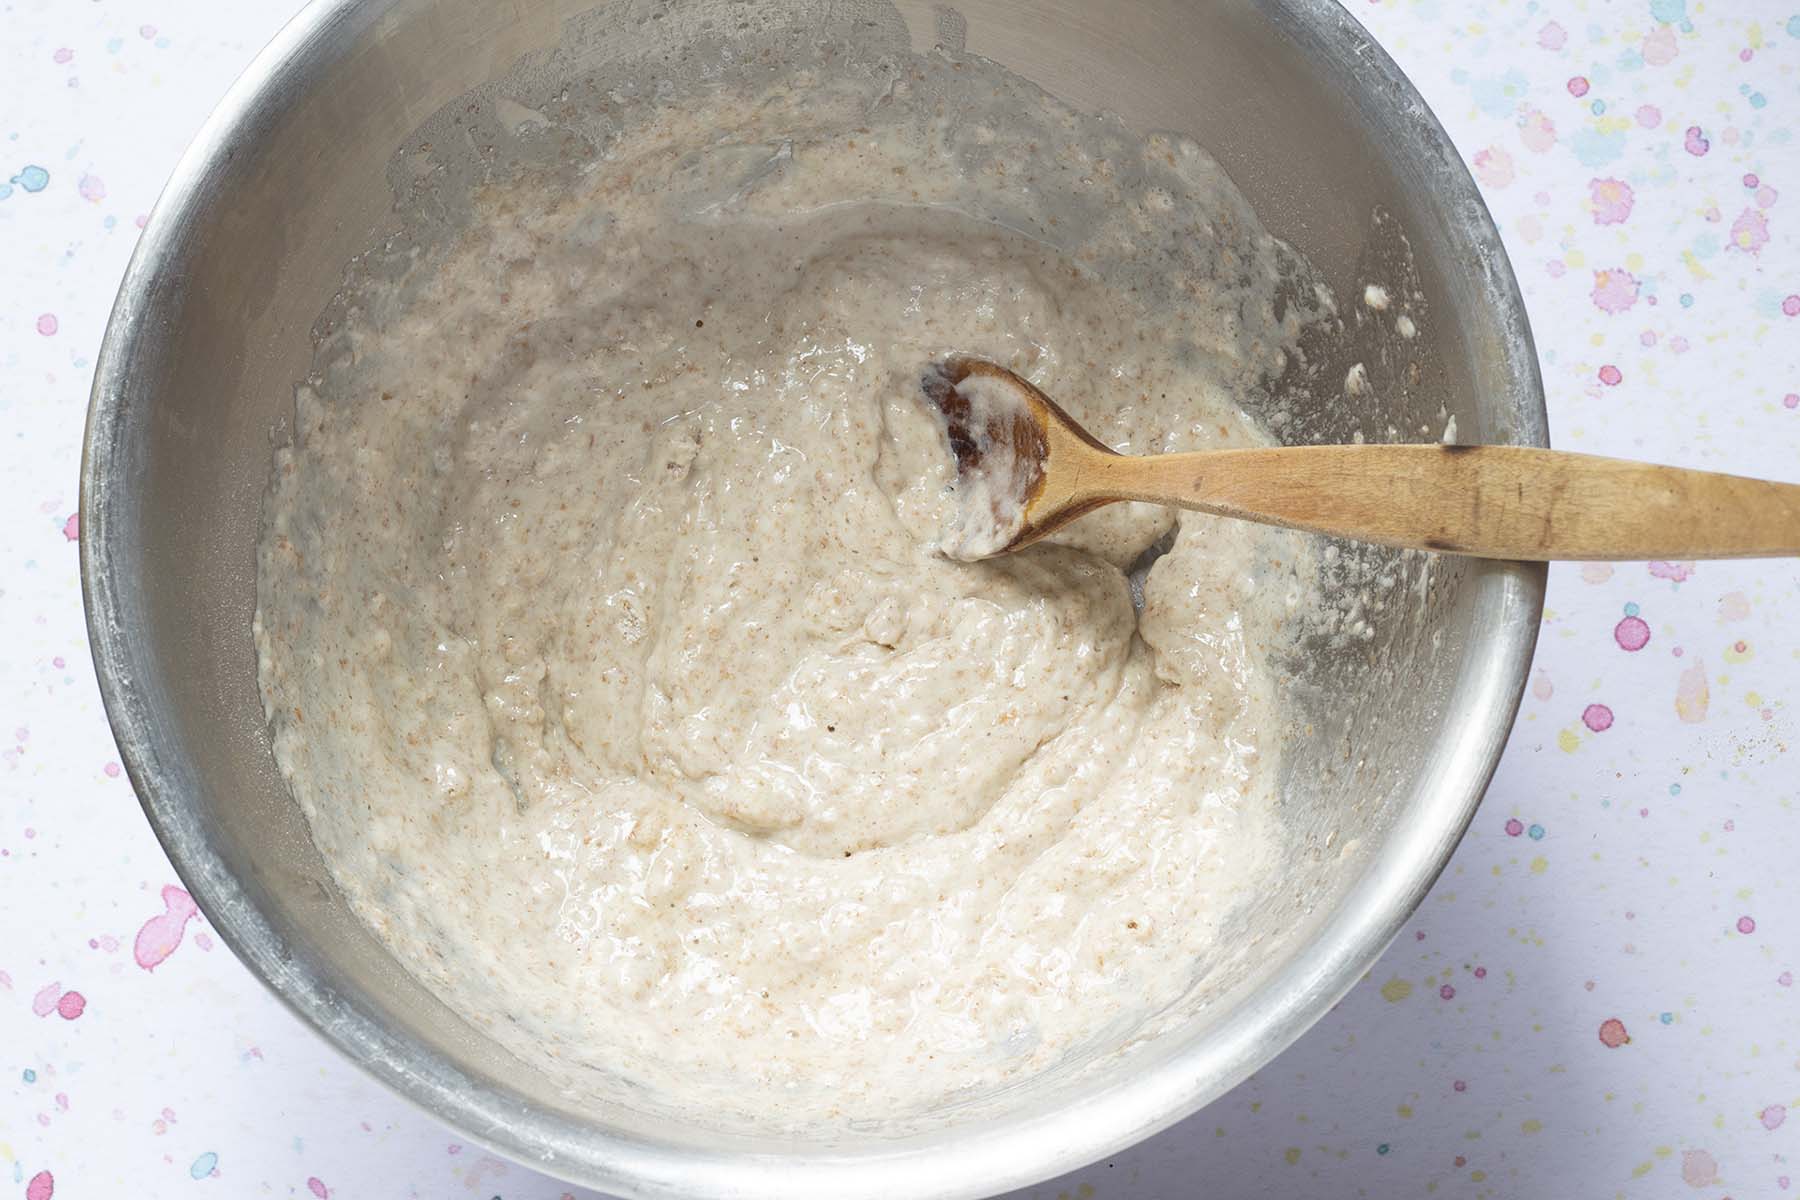 muffin batter in bowl